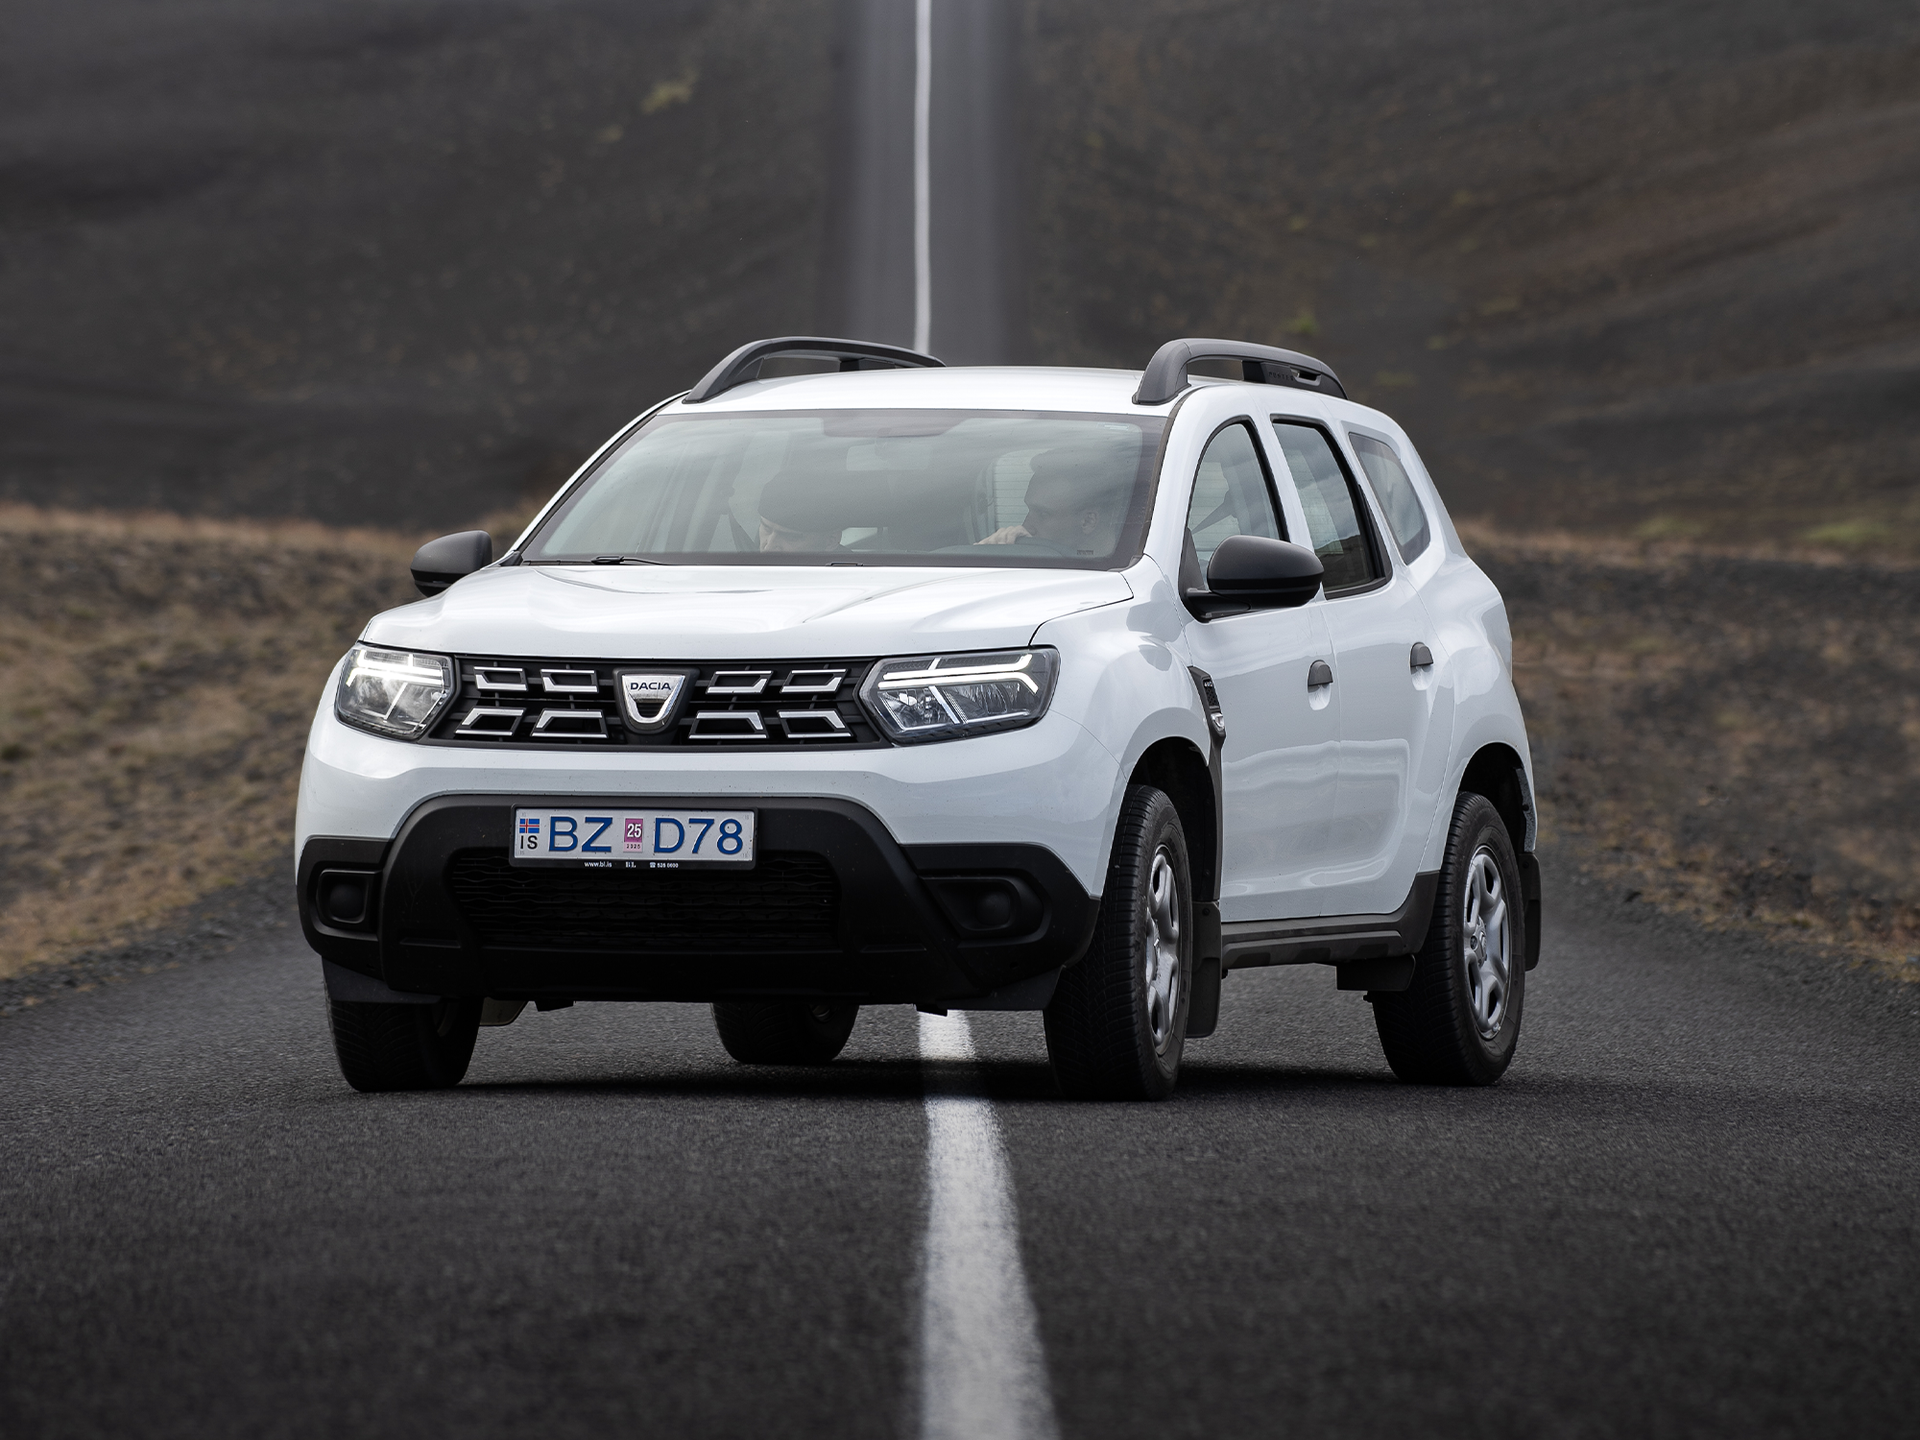 Dacia Duster 4x4 older model rental car parked in the road in Iceland